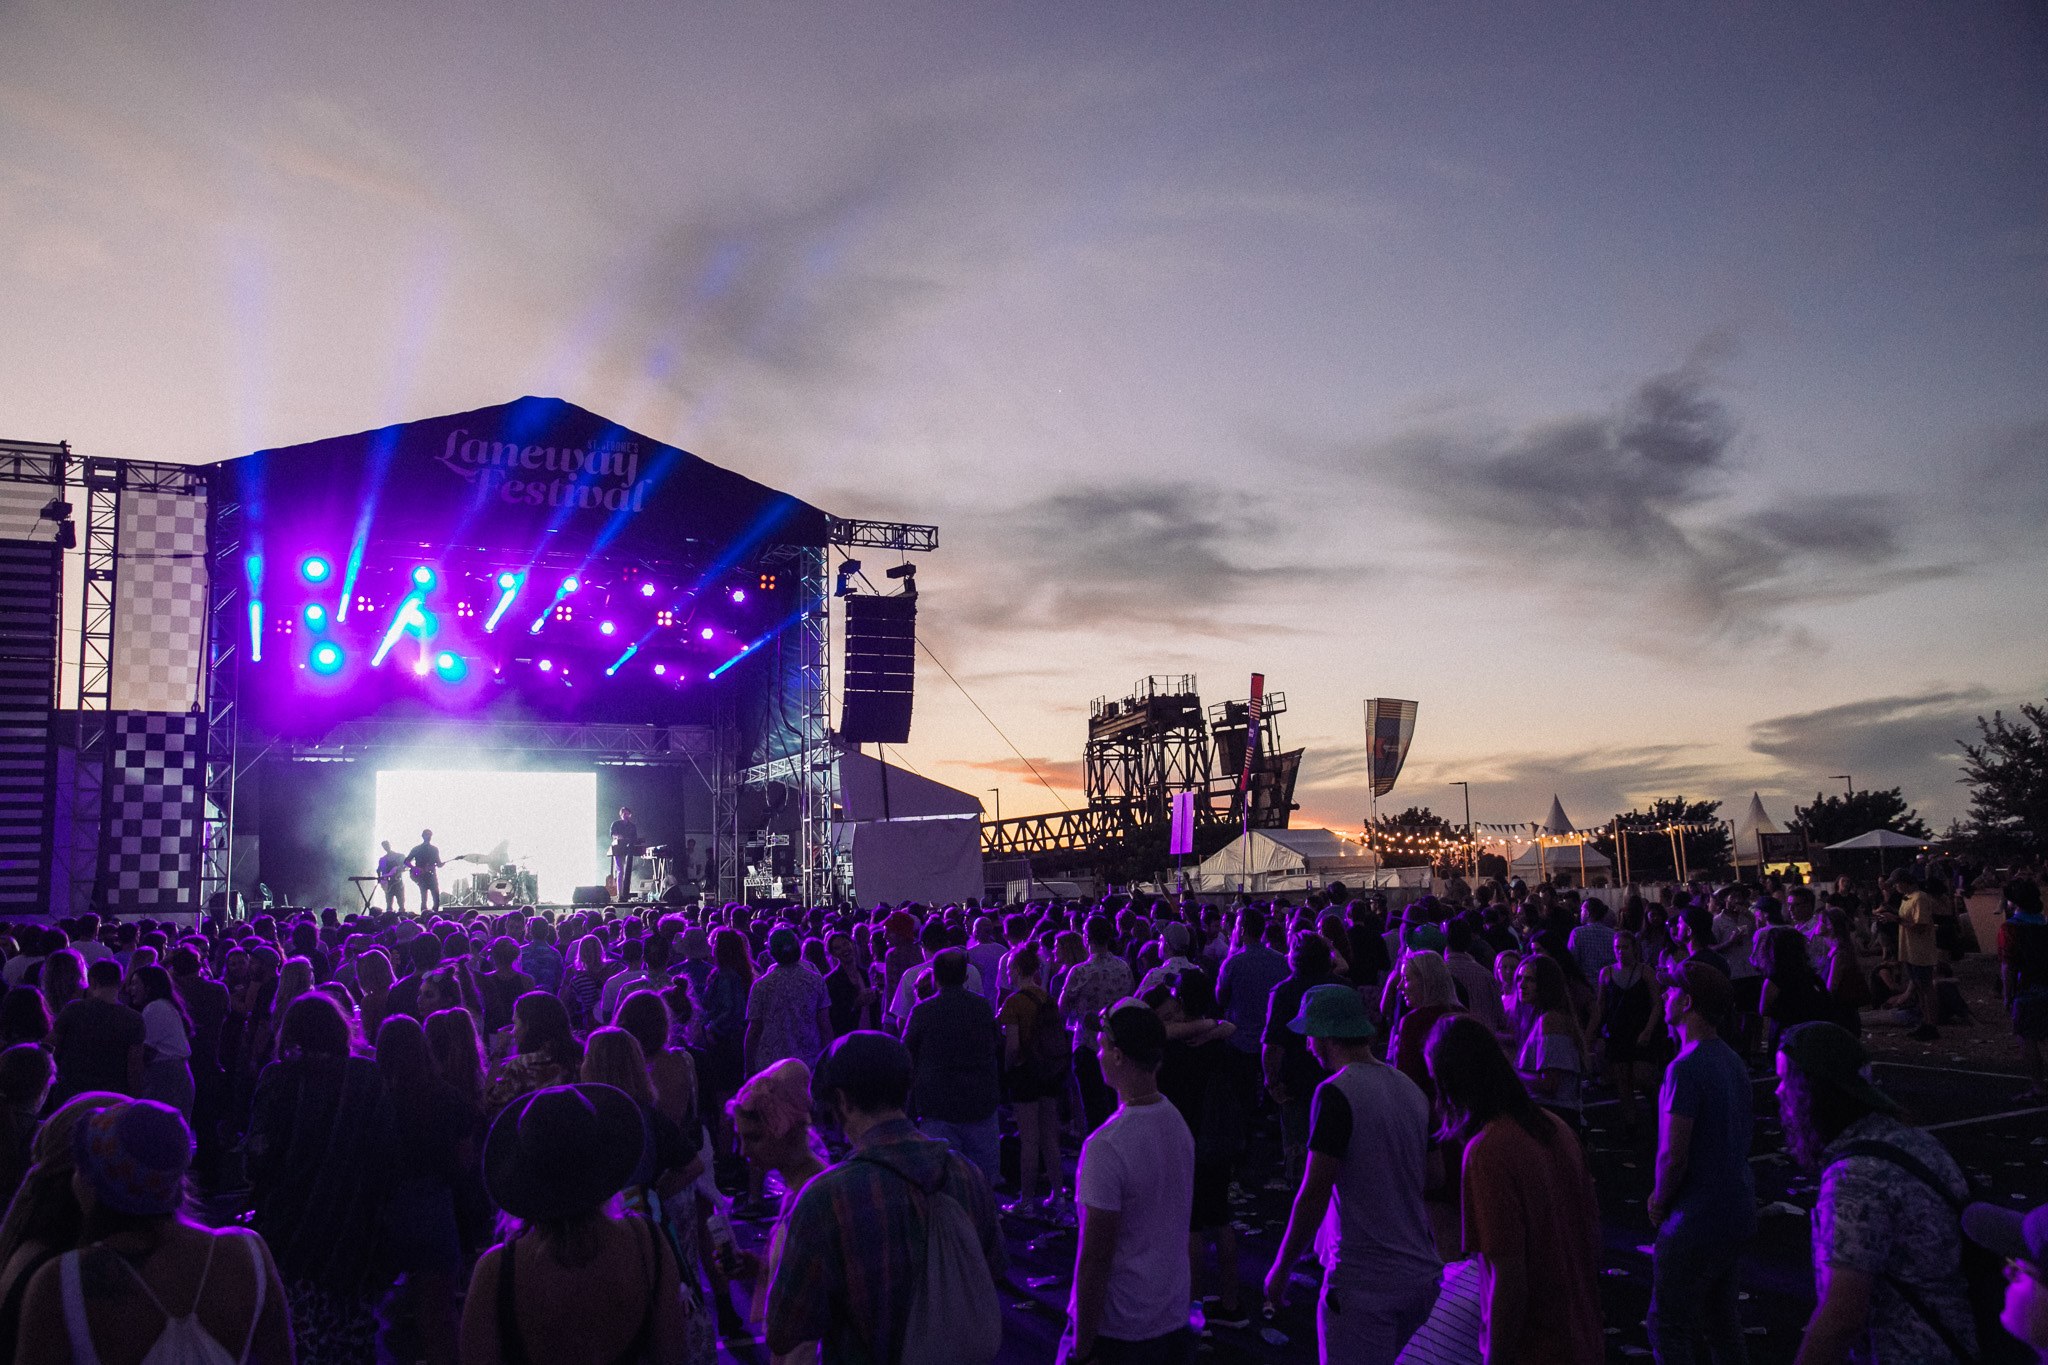 Triple j releases set times for Friday’s Laneway broadcast